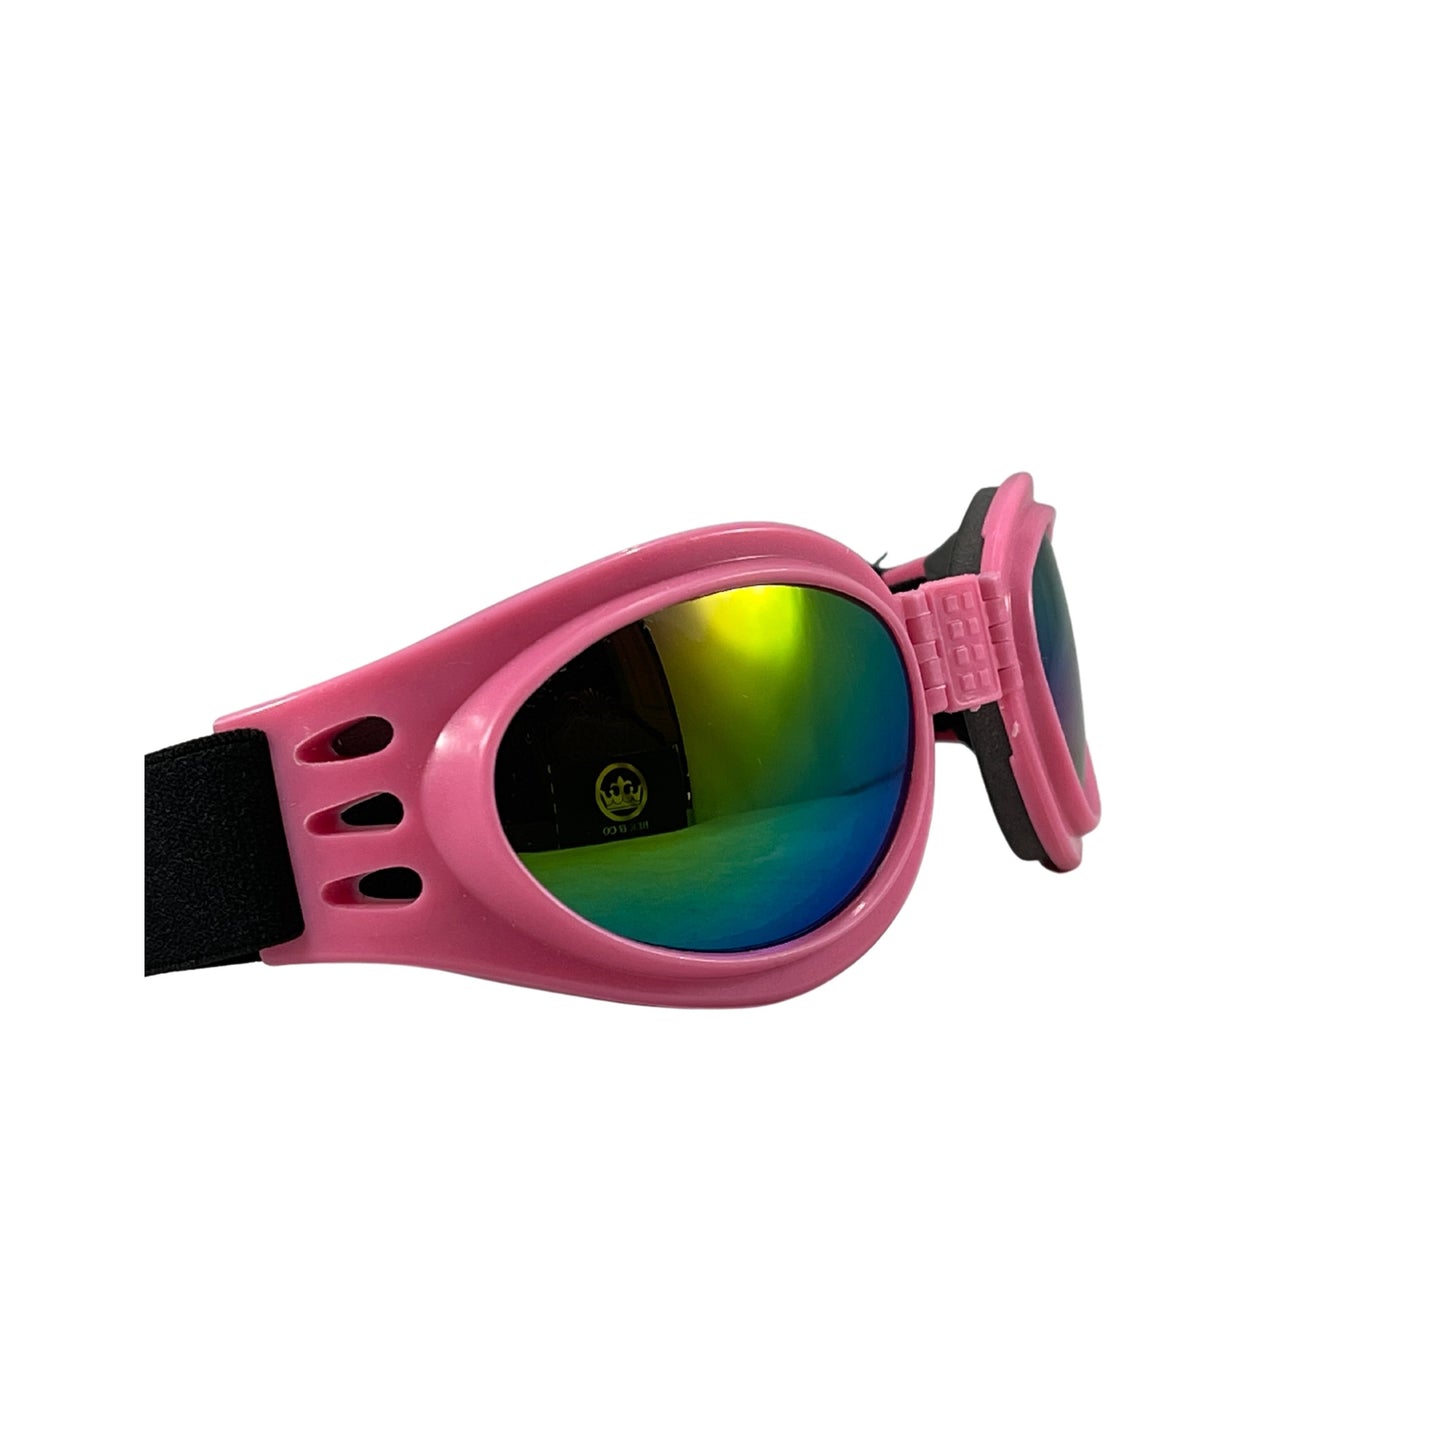 Pink Doggles